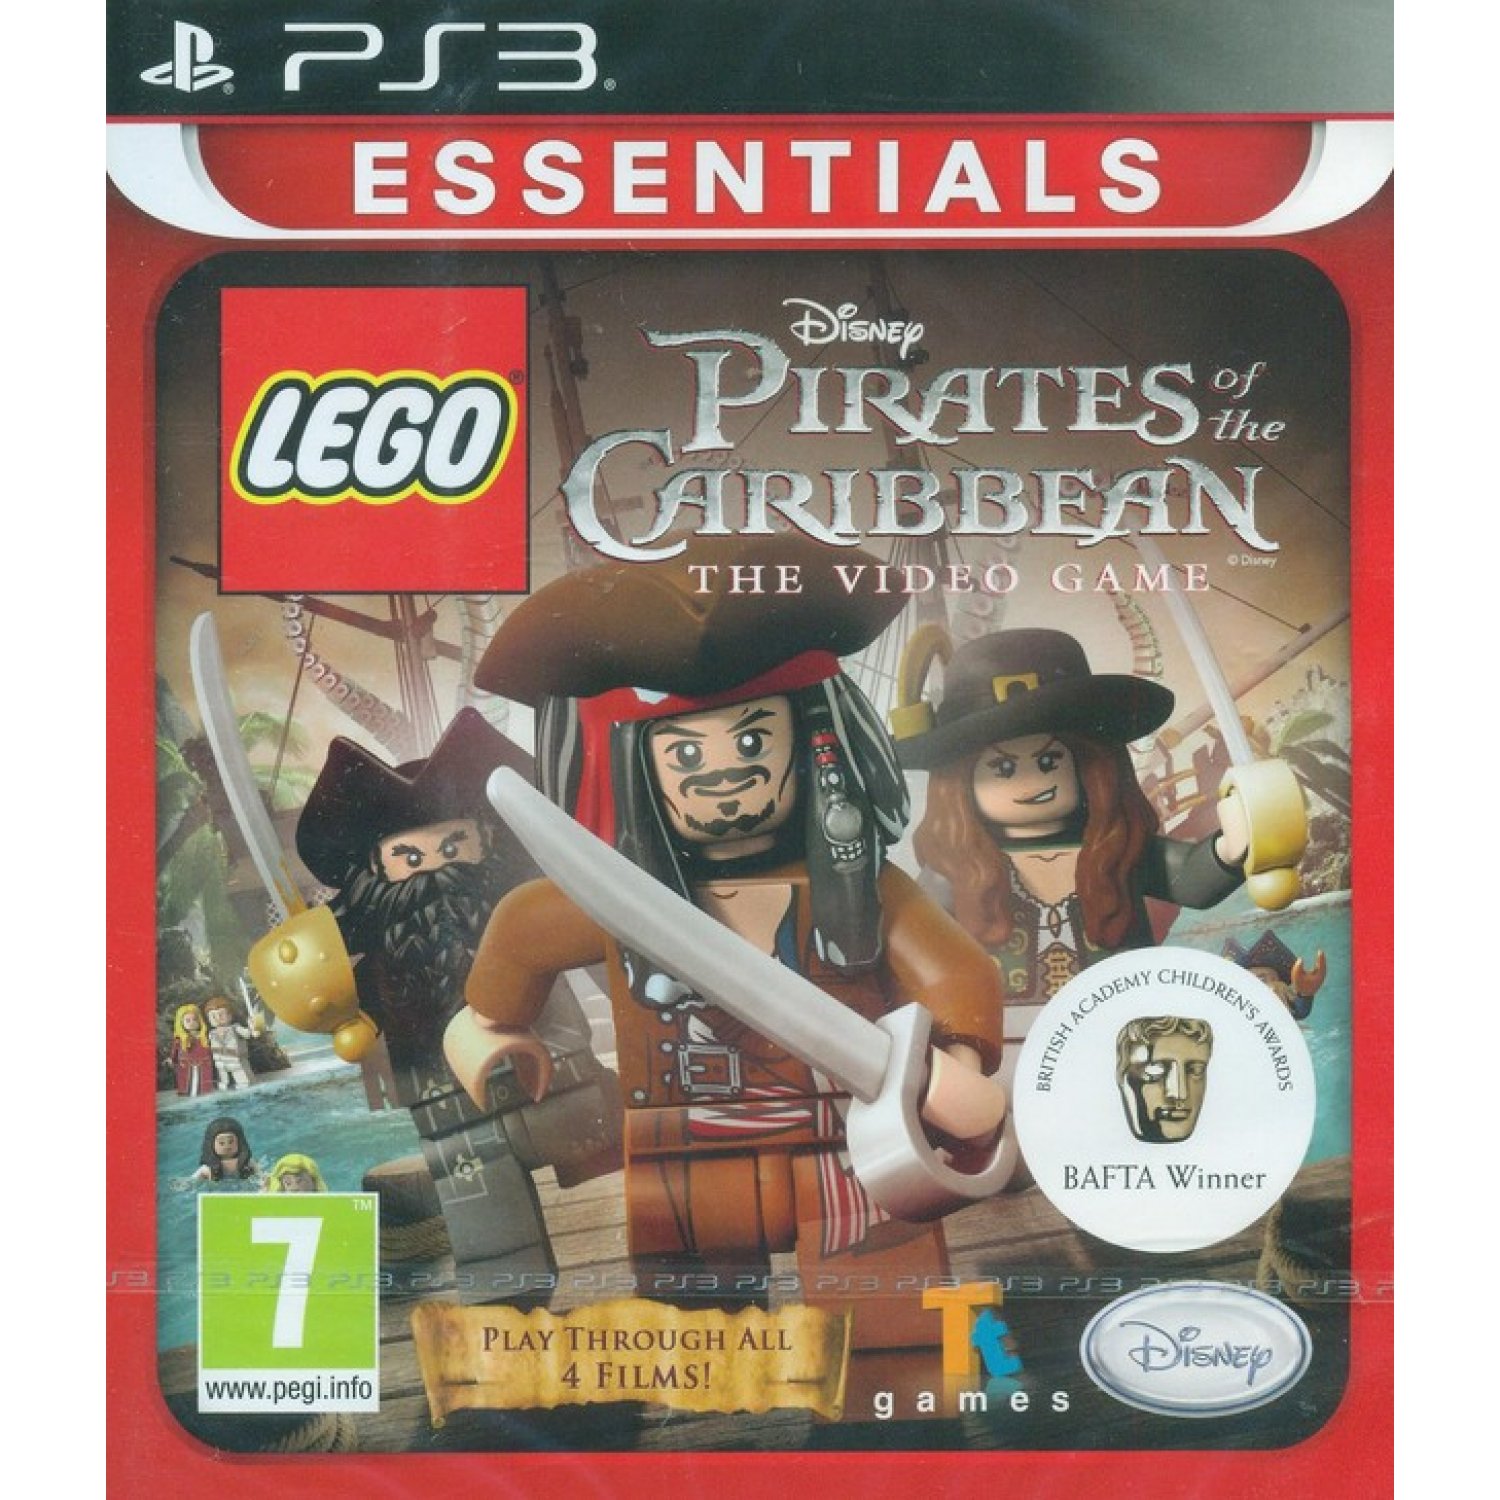 LEGO Pirates of the Caribbean (Co-op) (Essential)